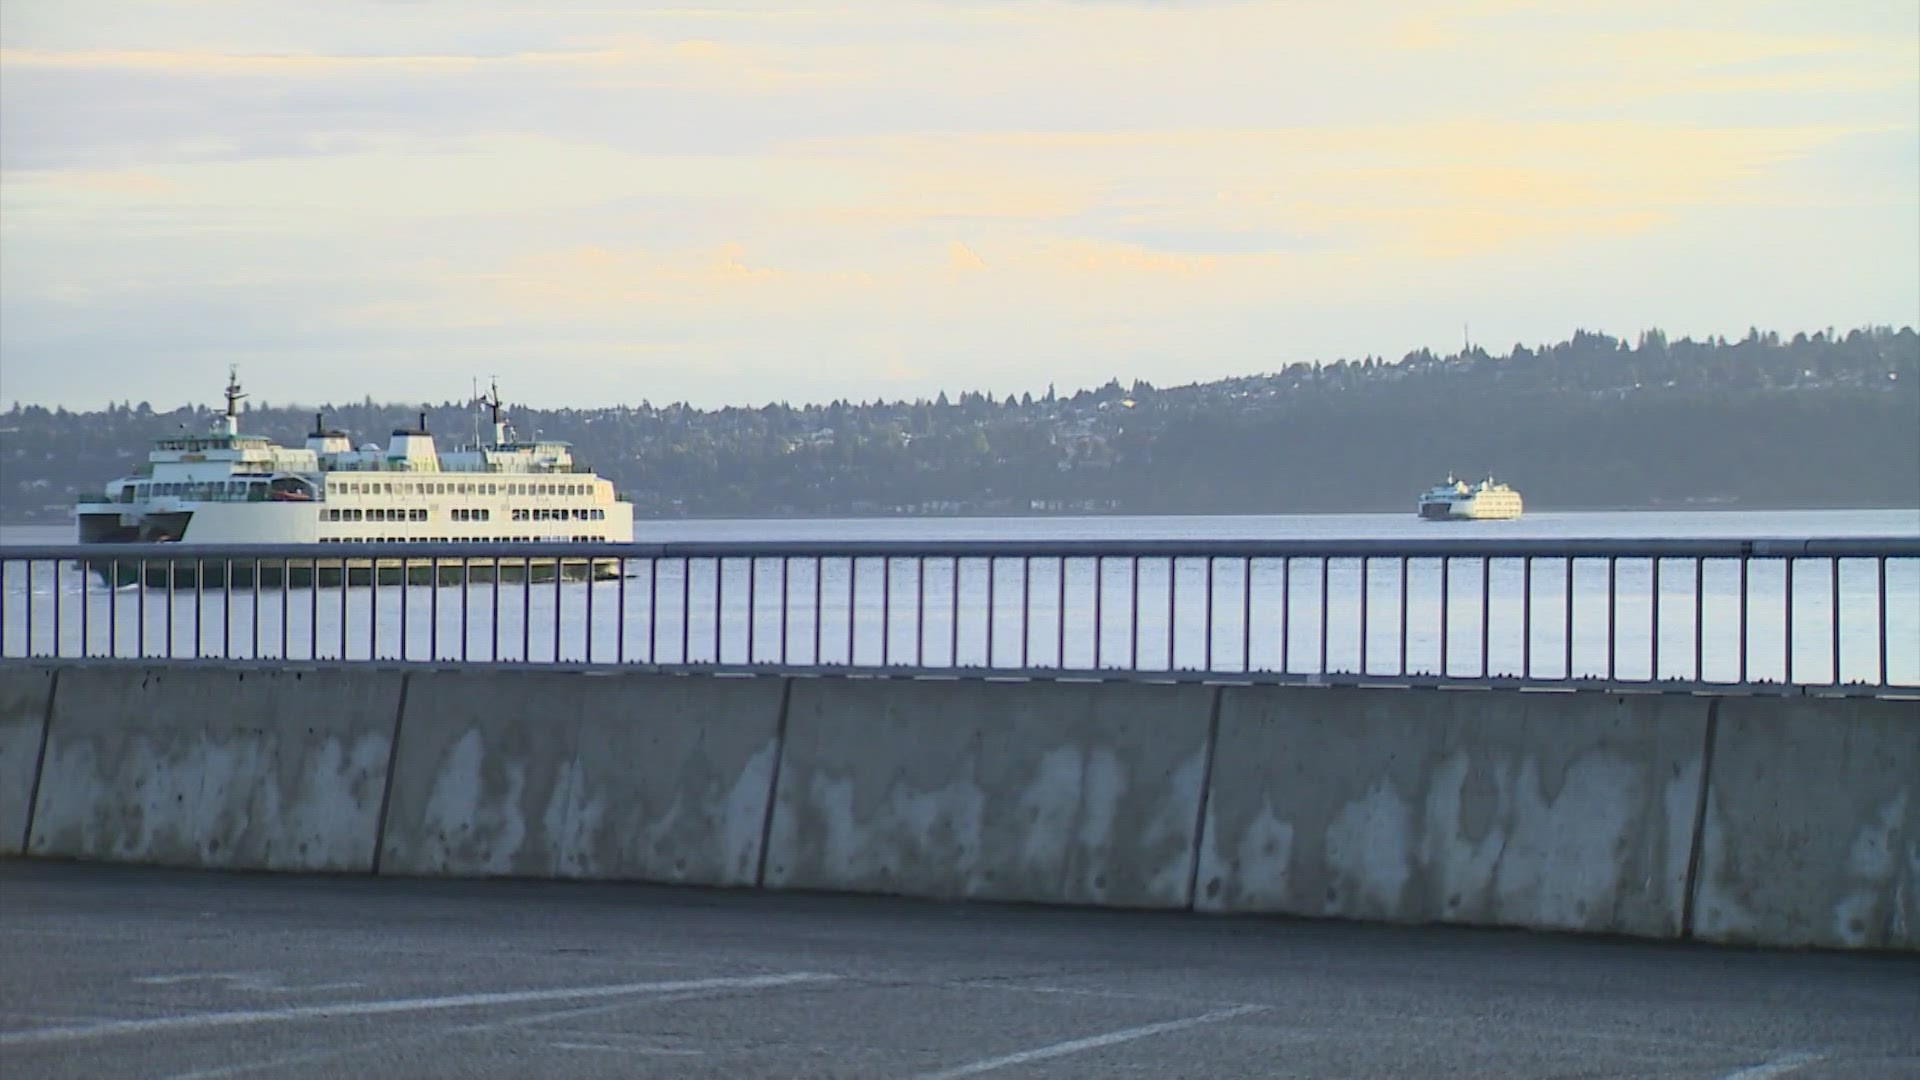 If commuter families become fed up with the ferry challenges and send their students elsewhere, that could cost Vashon Island schools millions in funding.